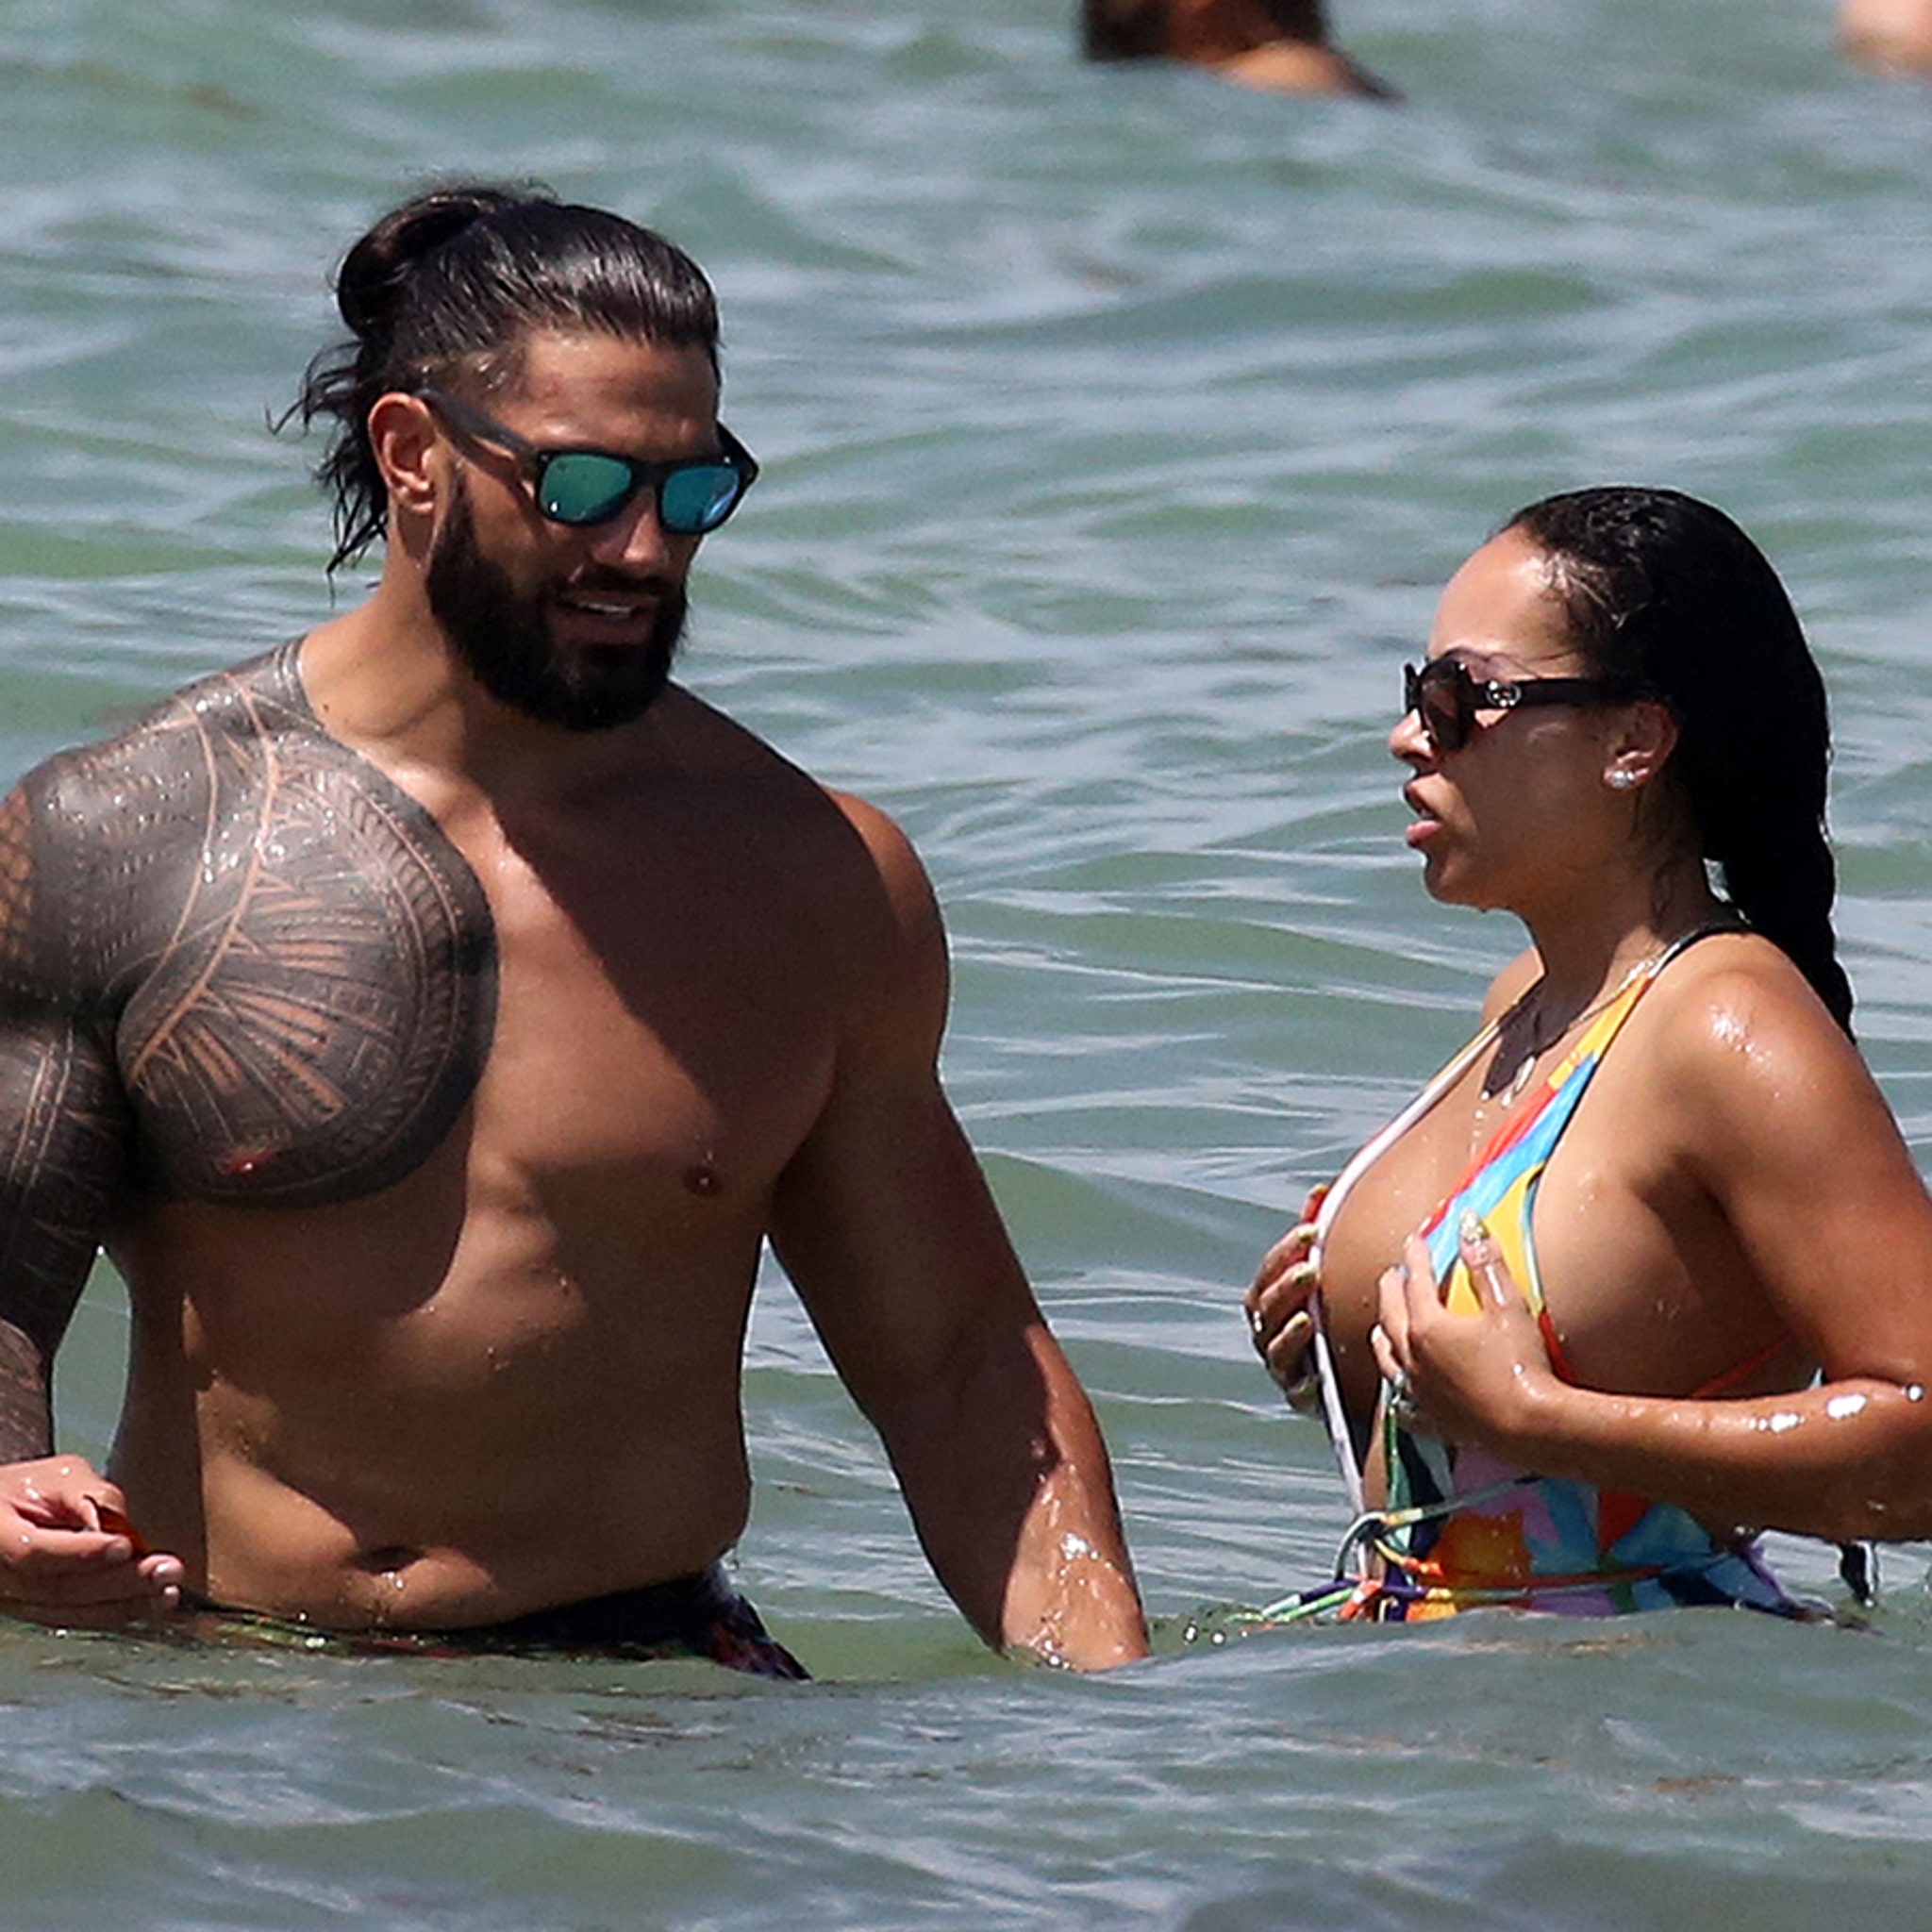 WWE Superstar Roman Reigns, Wife Show Off Smokin Hot Beach Bods In Miami pic